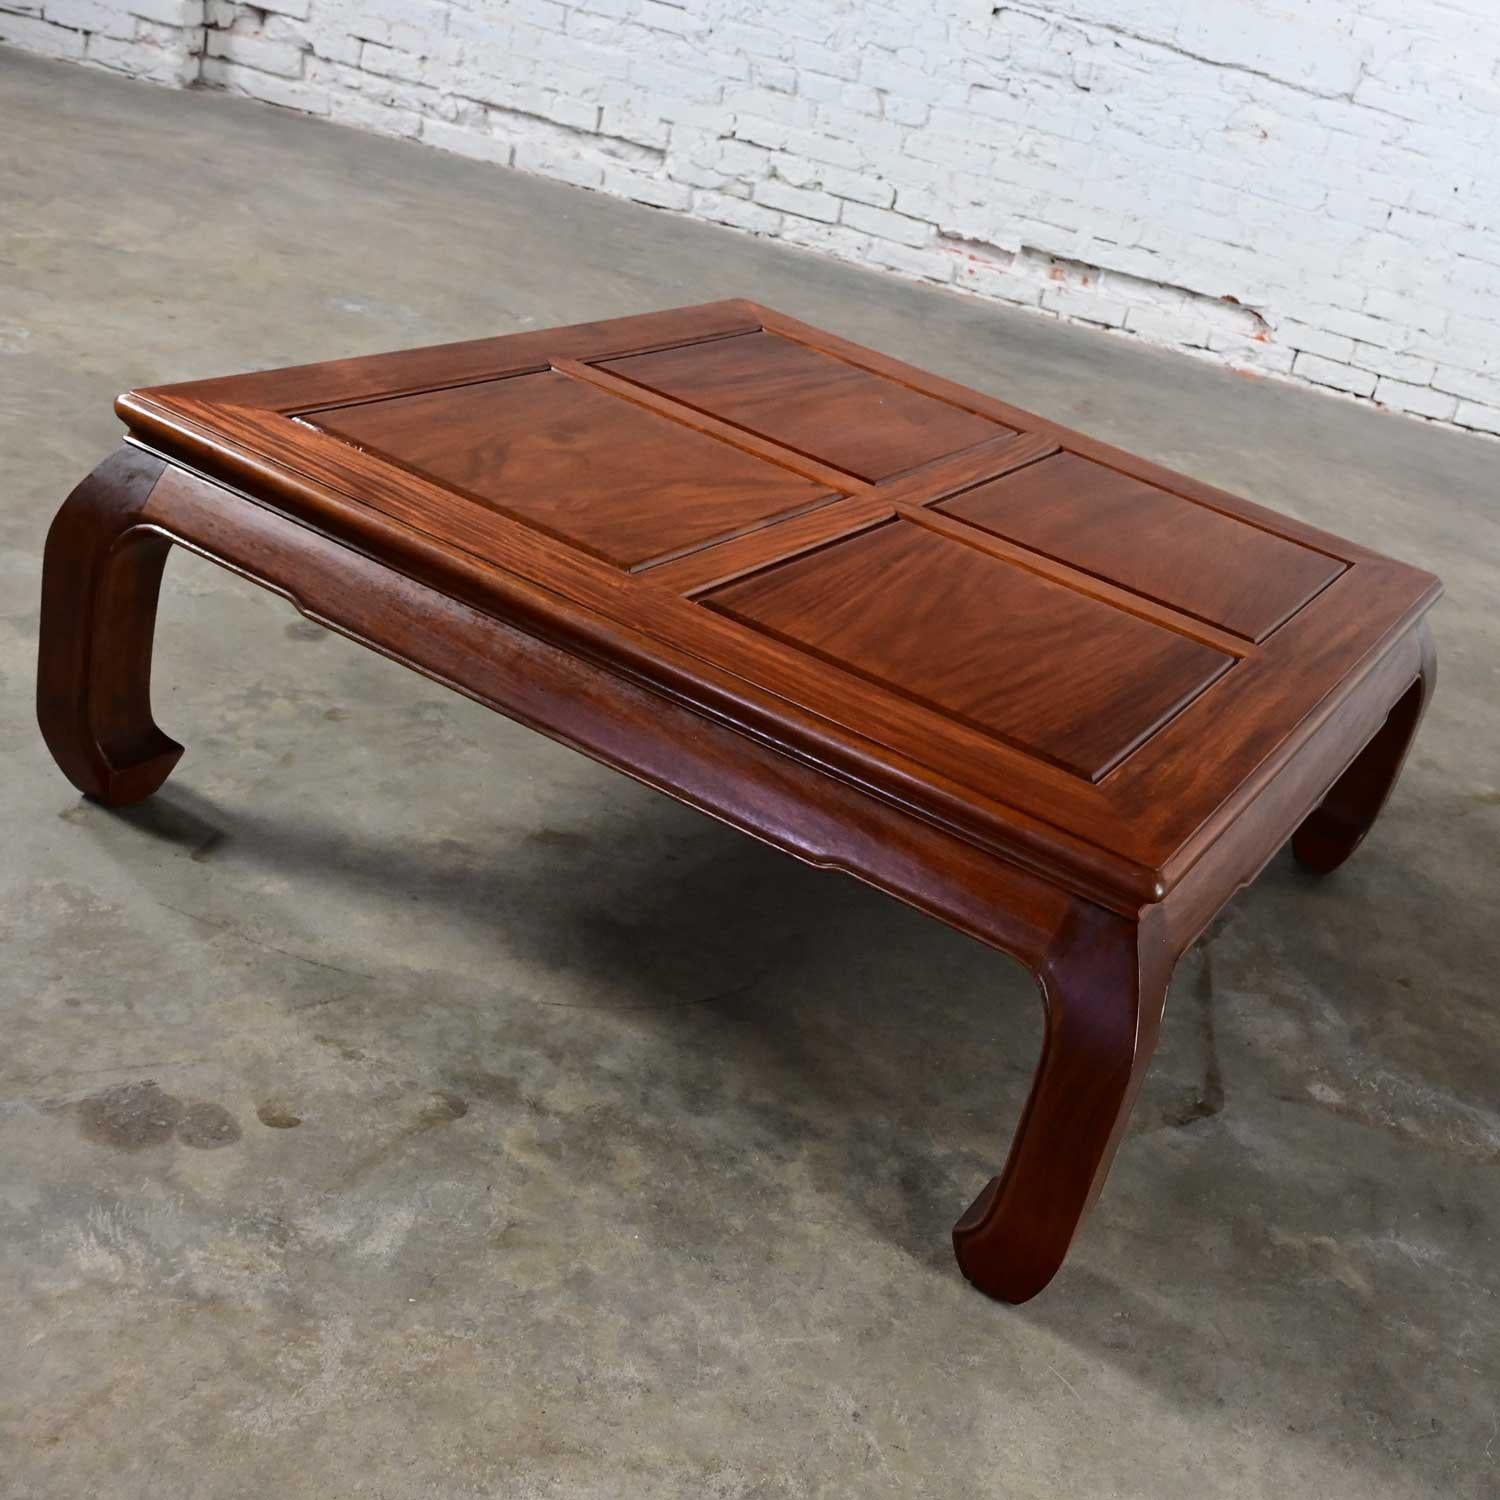 80s coffee table with cushions